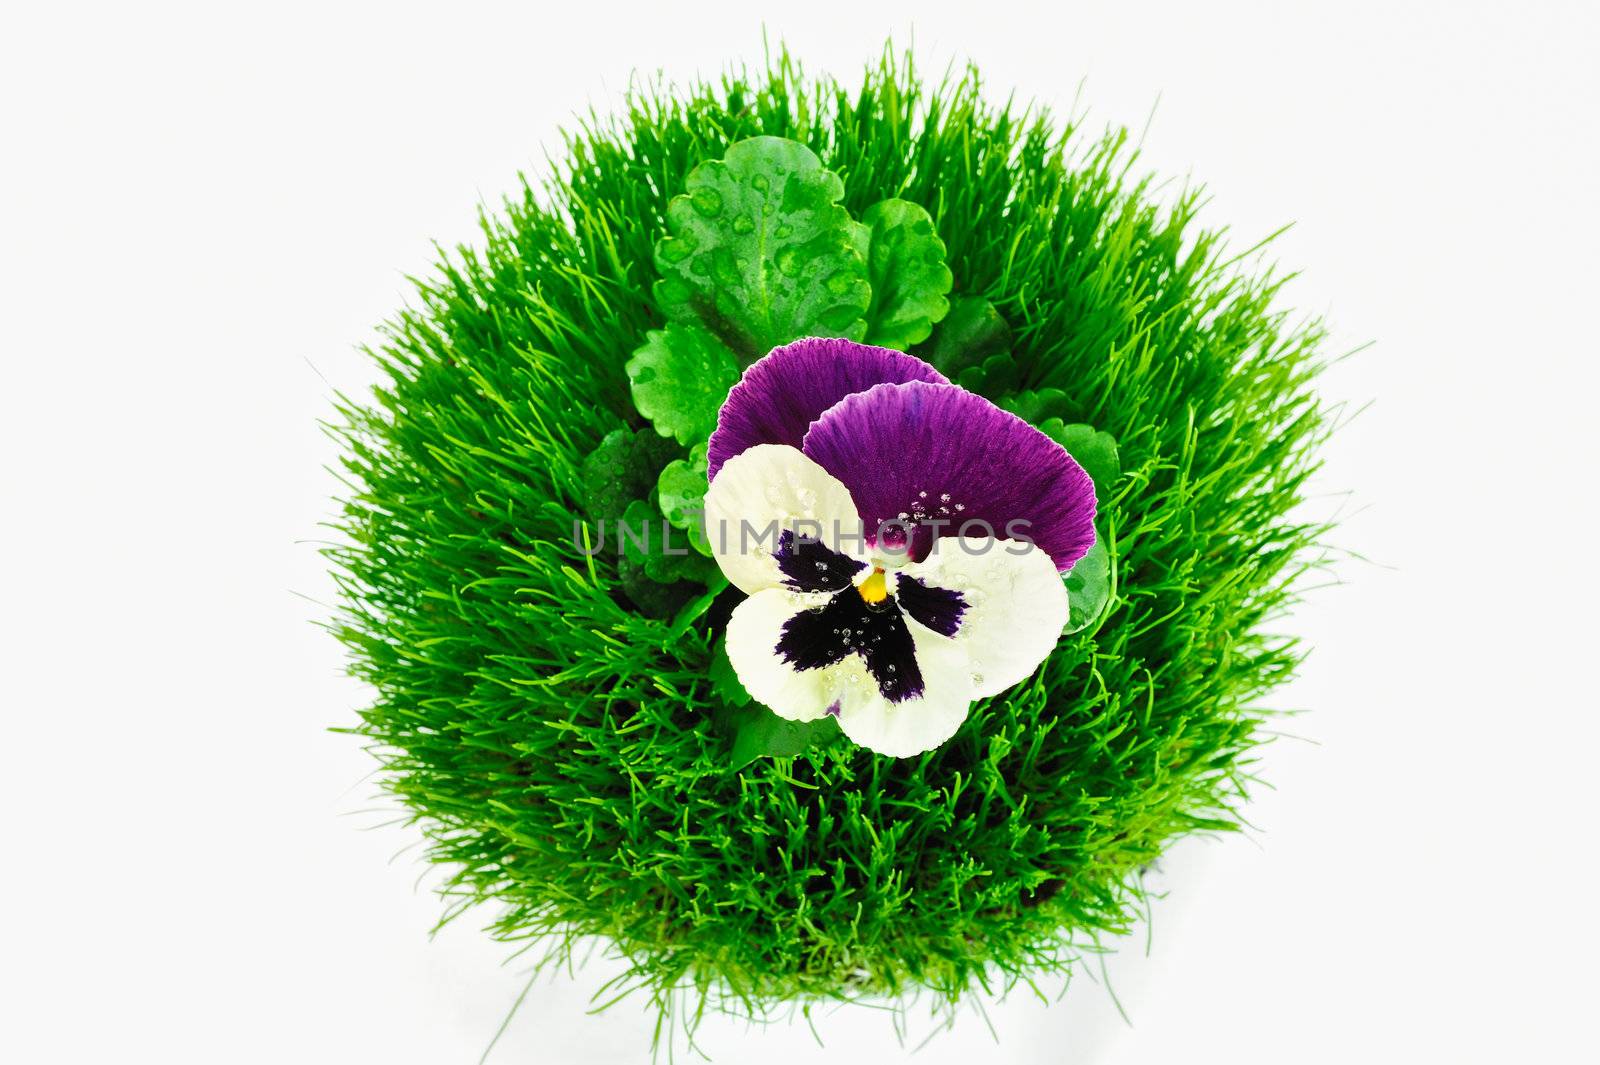 Round ball of grass with a violet in the center